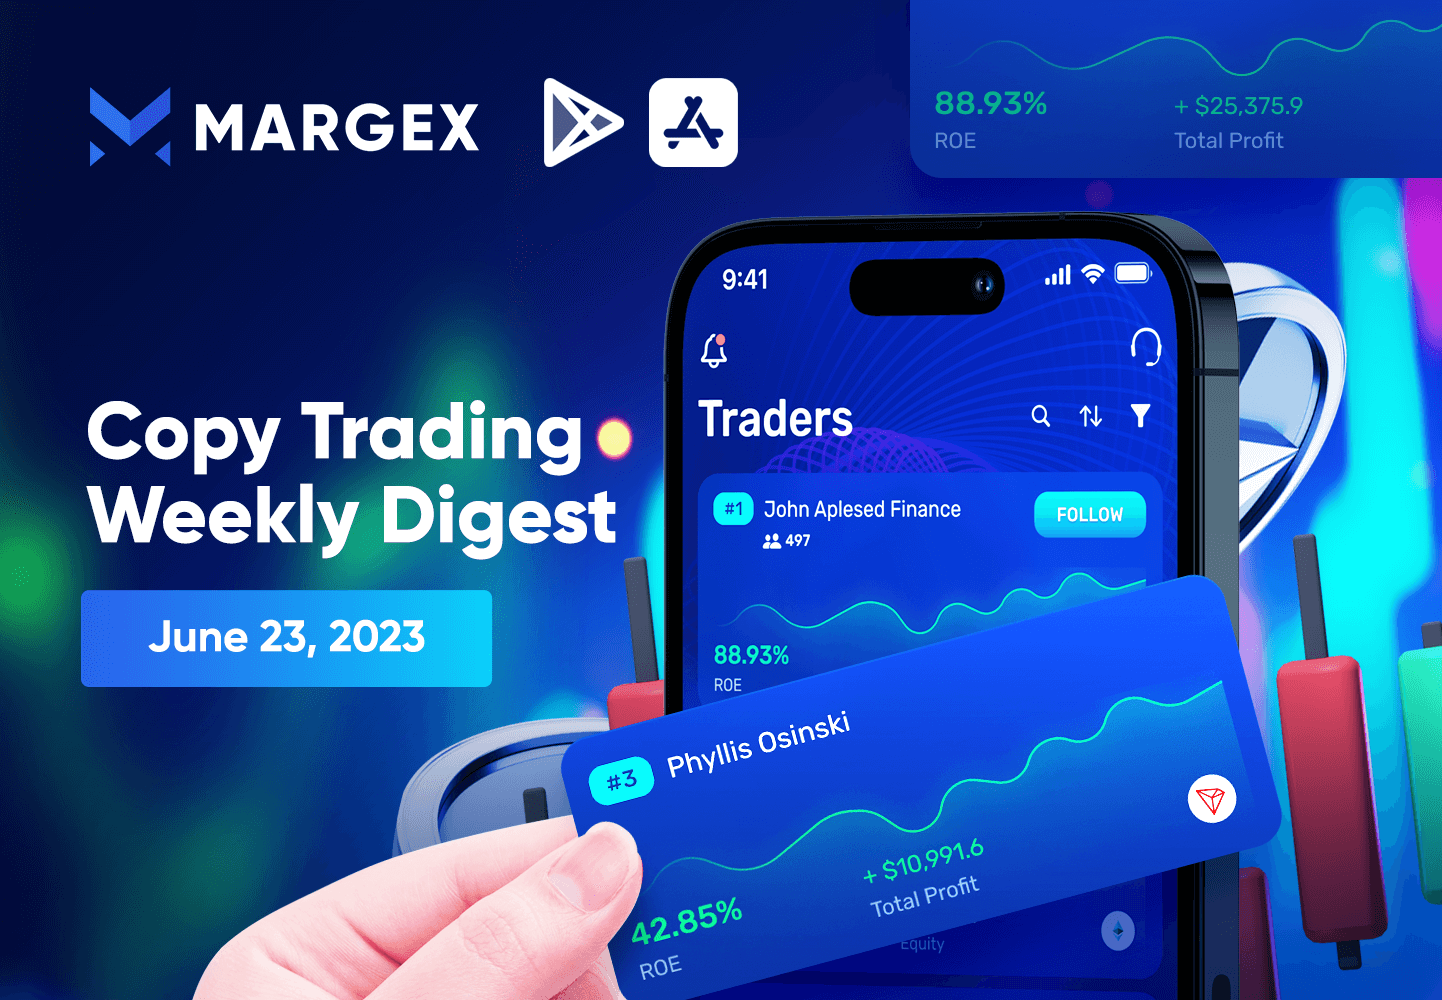 Copy Trading Weekly Digest: June 23, 2023